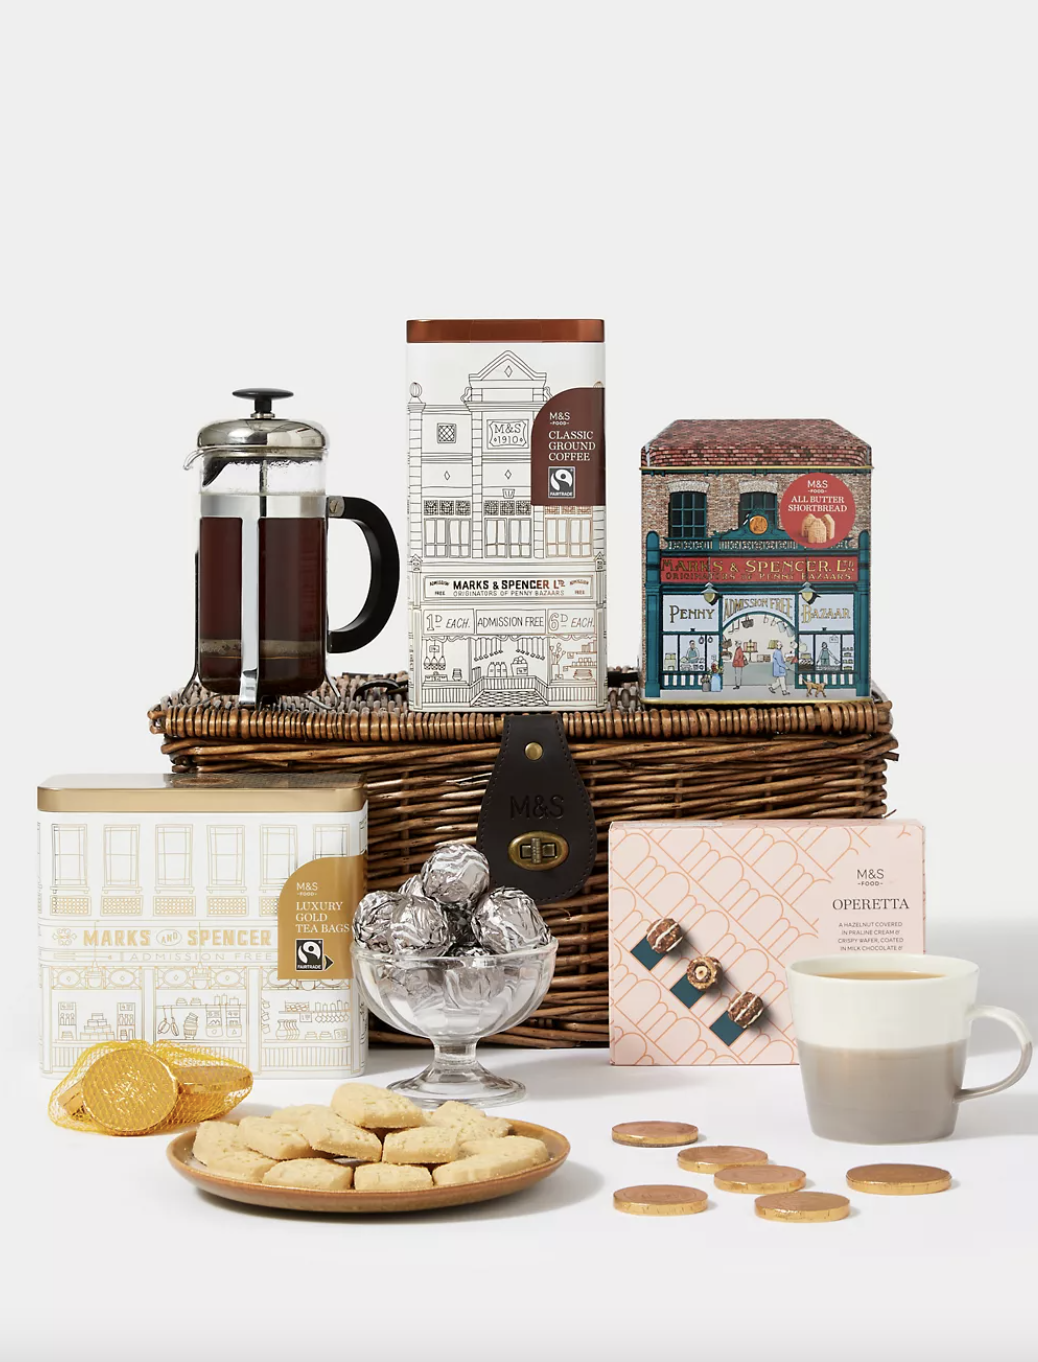 Best Marks & Spencer Christmas gifts, with options from as little as £5